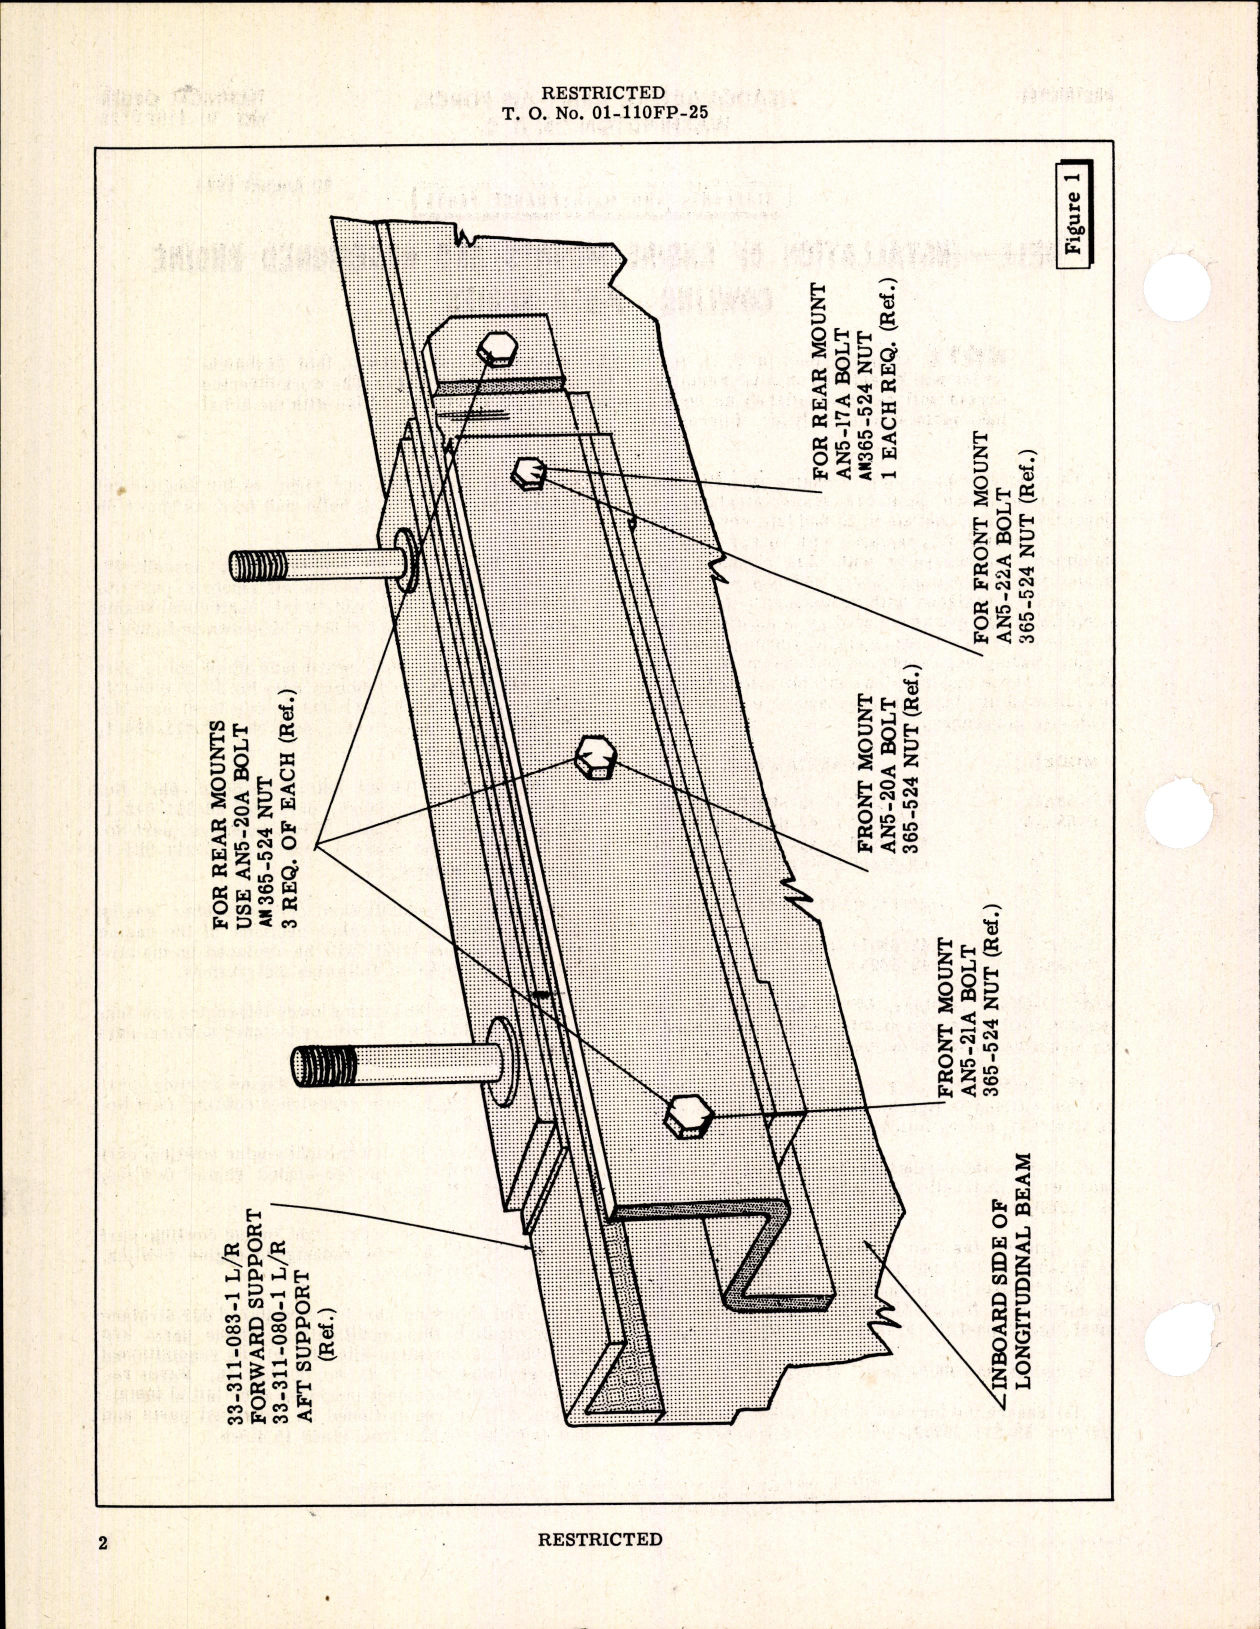 Sample page 2 from AirCorps Library document: Installation of Engine Mounts & Redesigned Engine Cowling